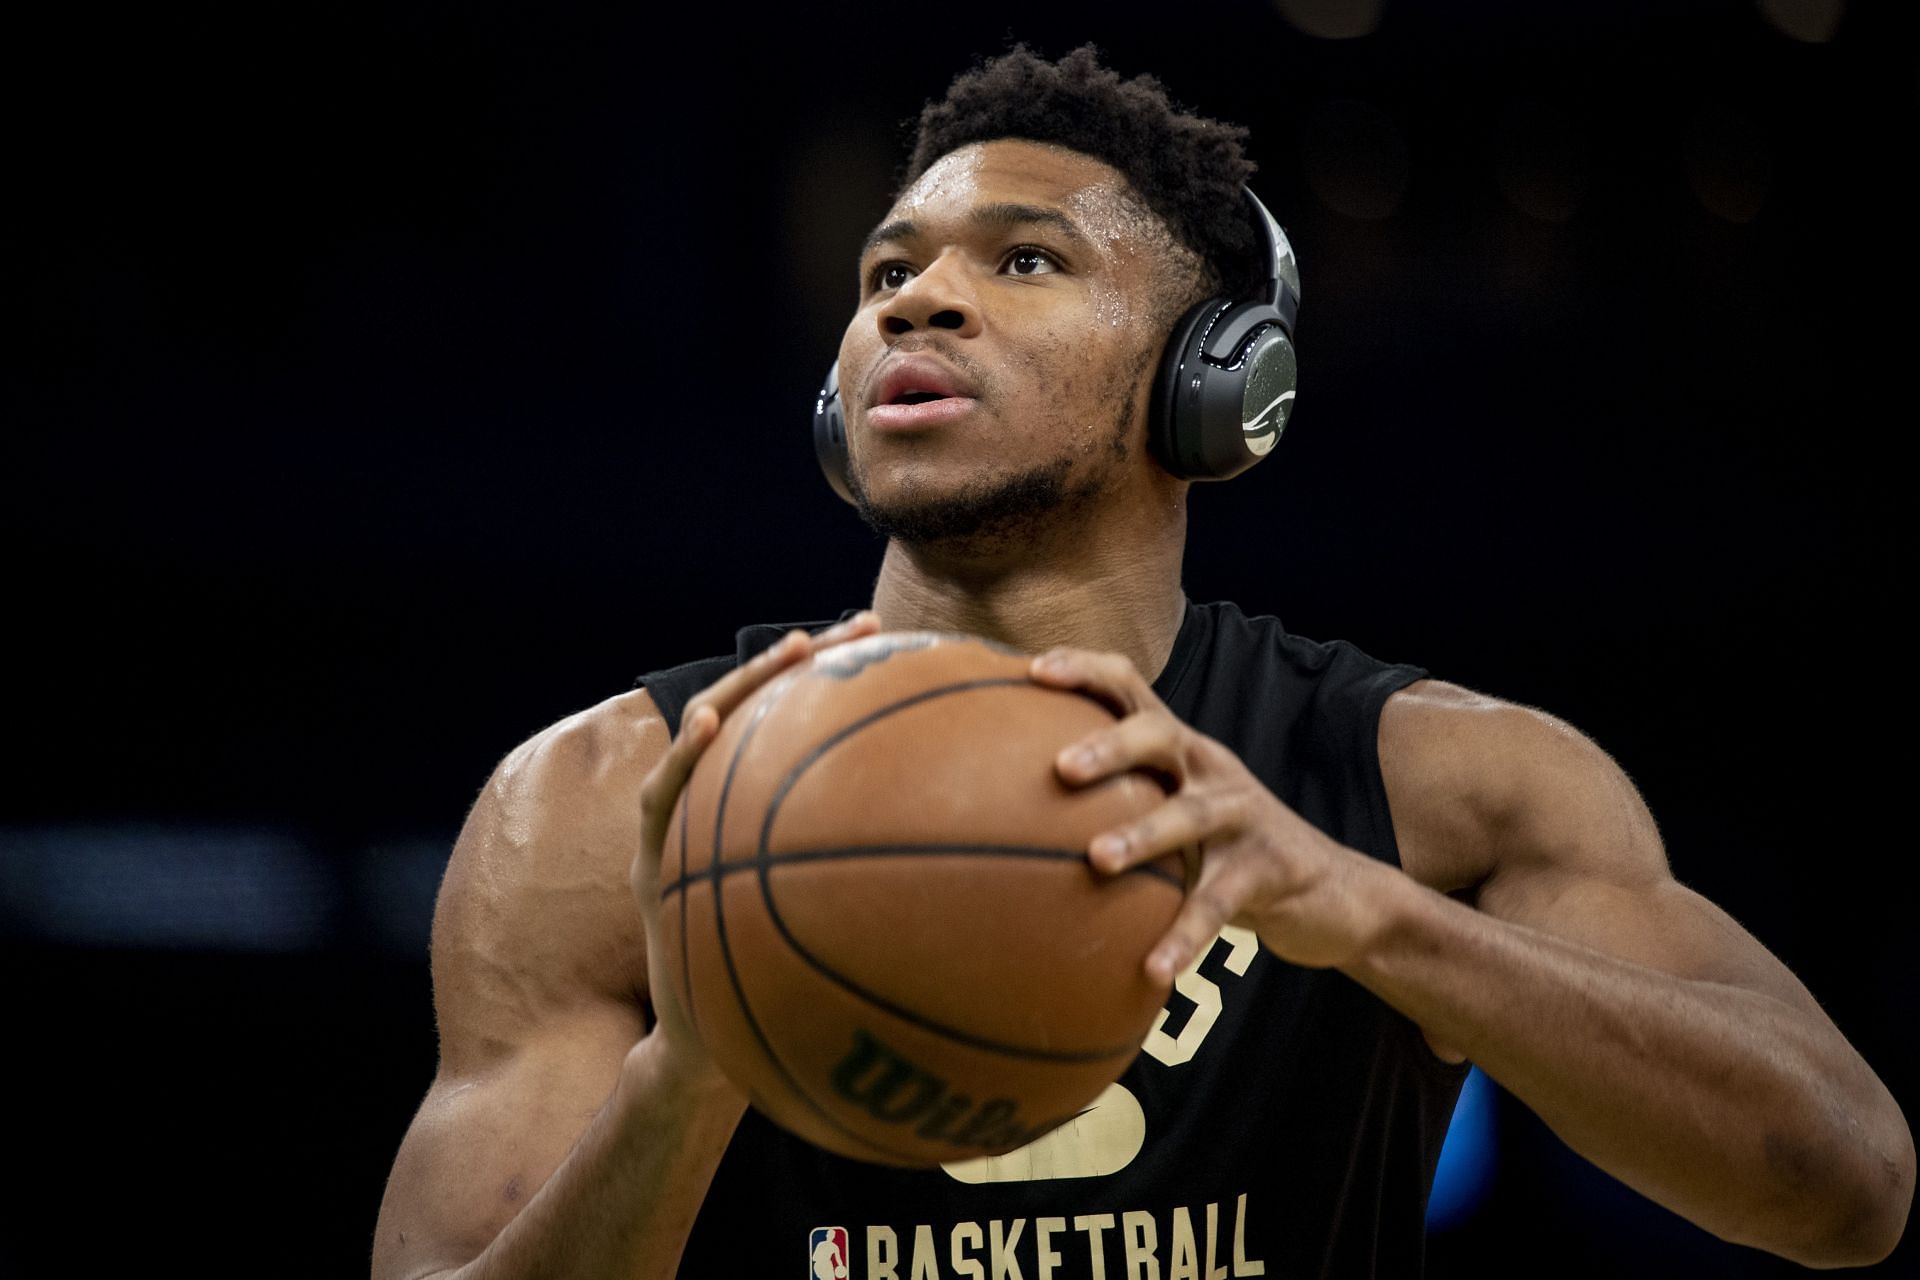 BJ Armstrong believes Giannis Antetokounmpo should be included in NBA&#039;s Mount Rushmore